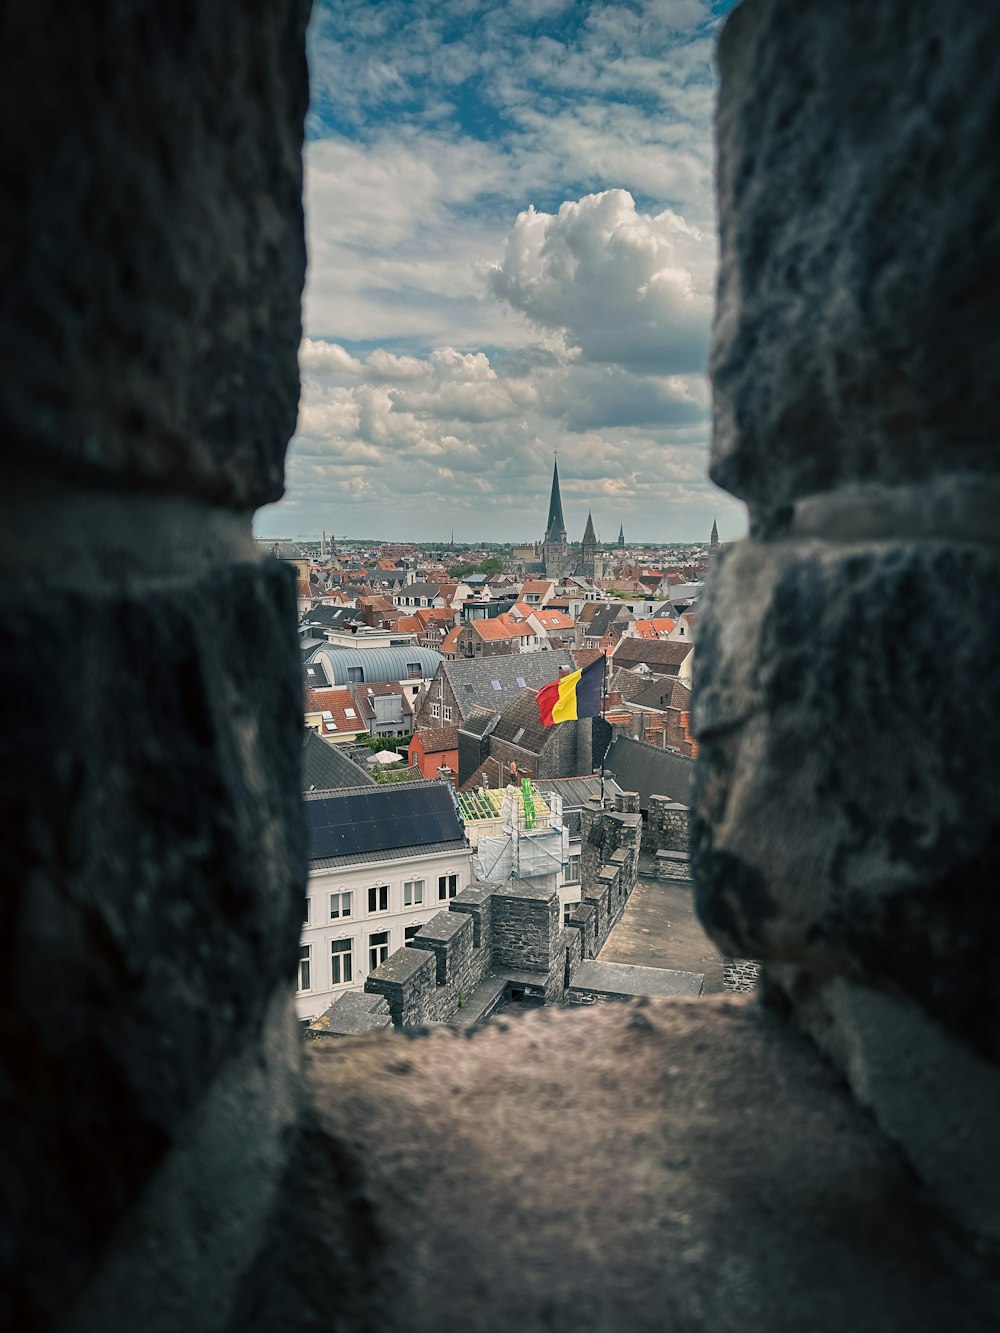 a view of a city through a stone window